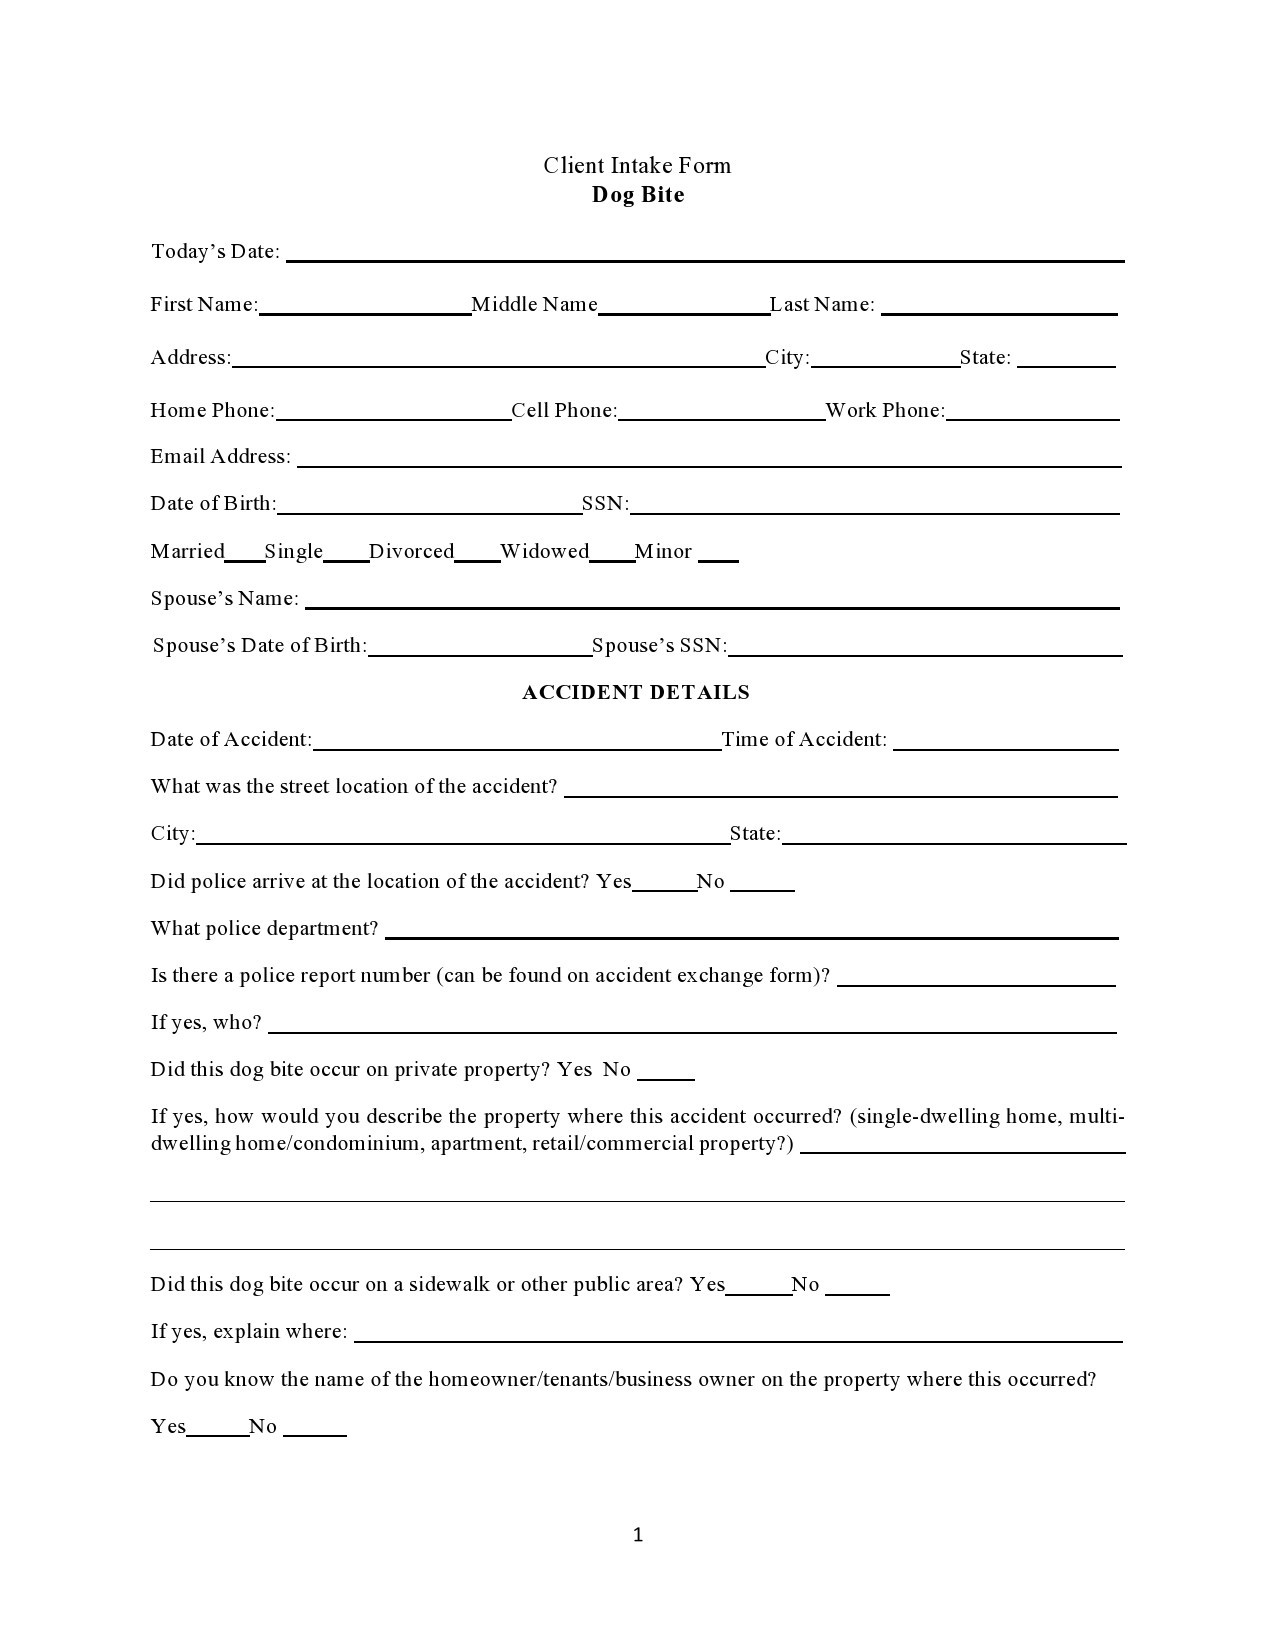 Free client intake form 20